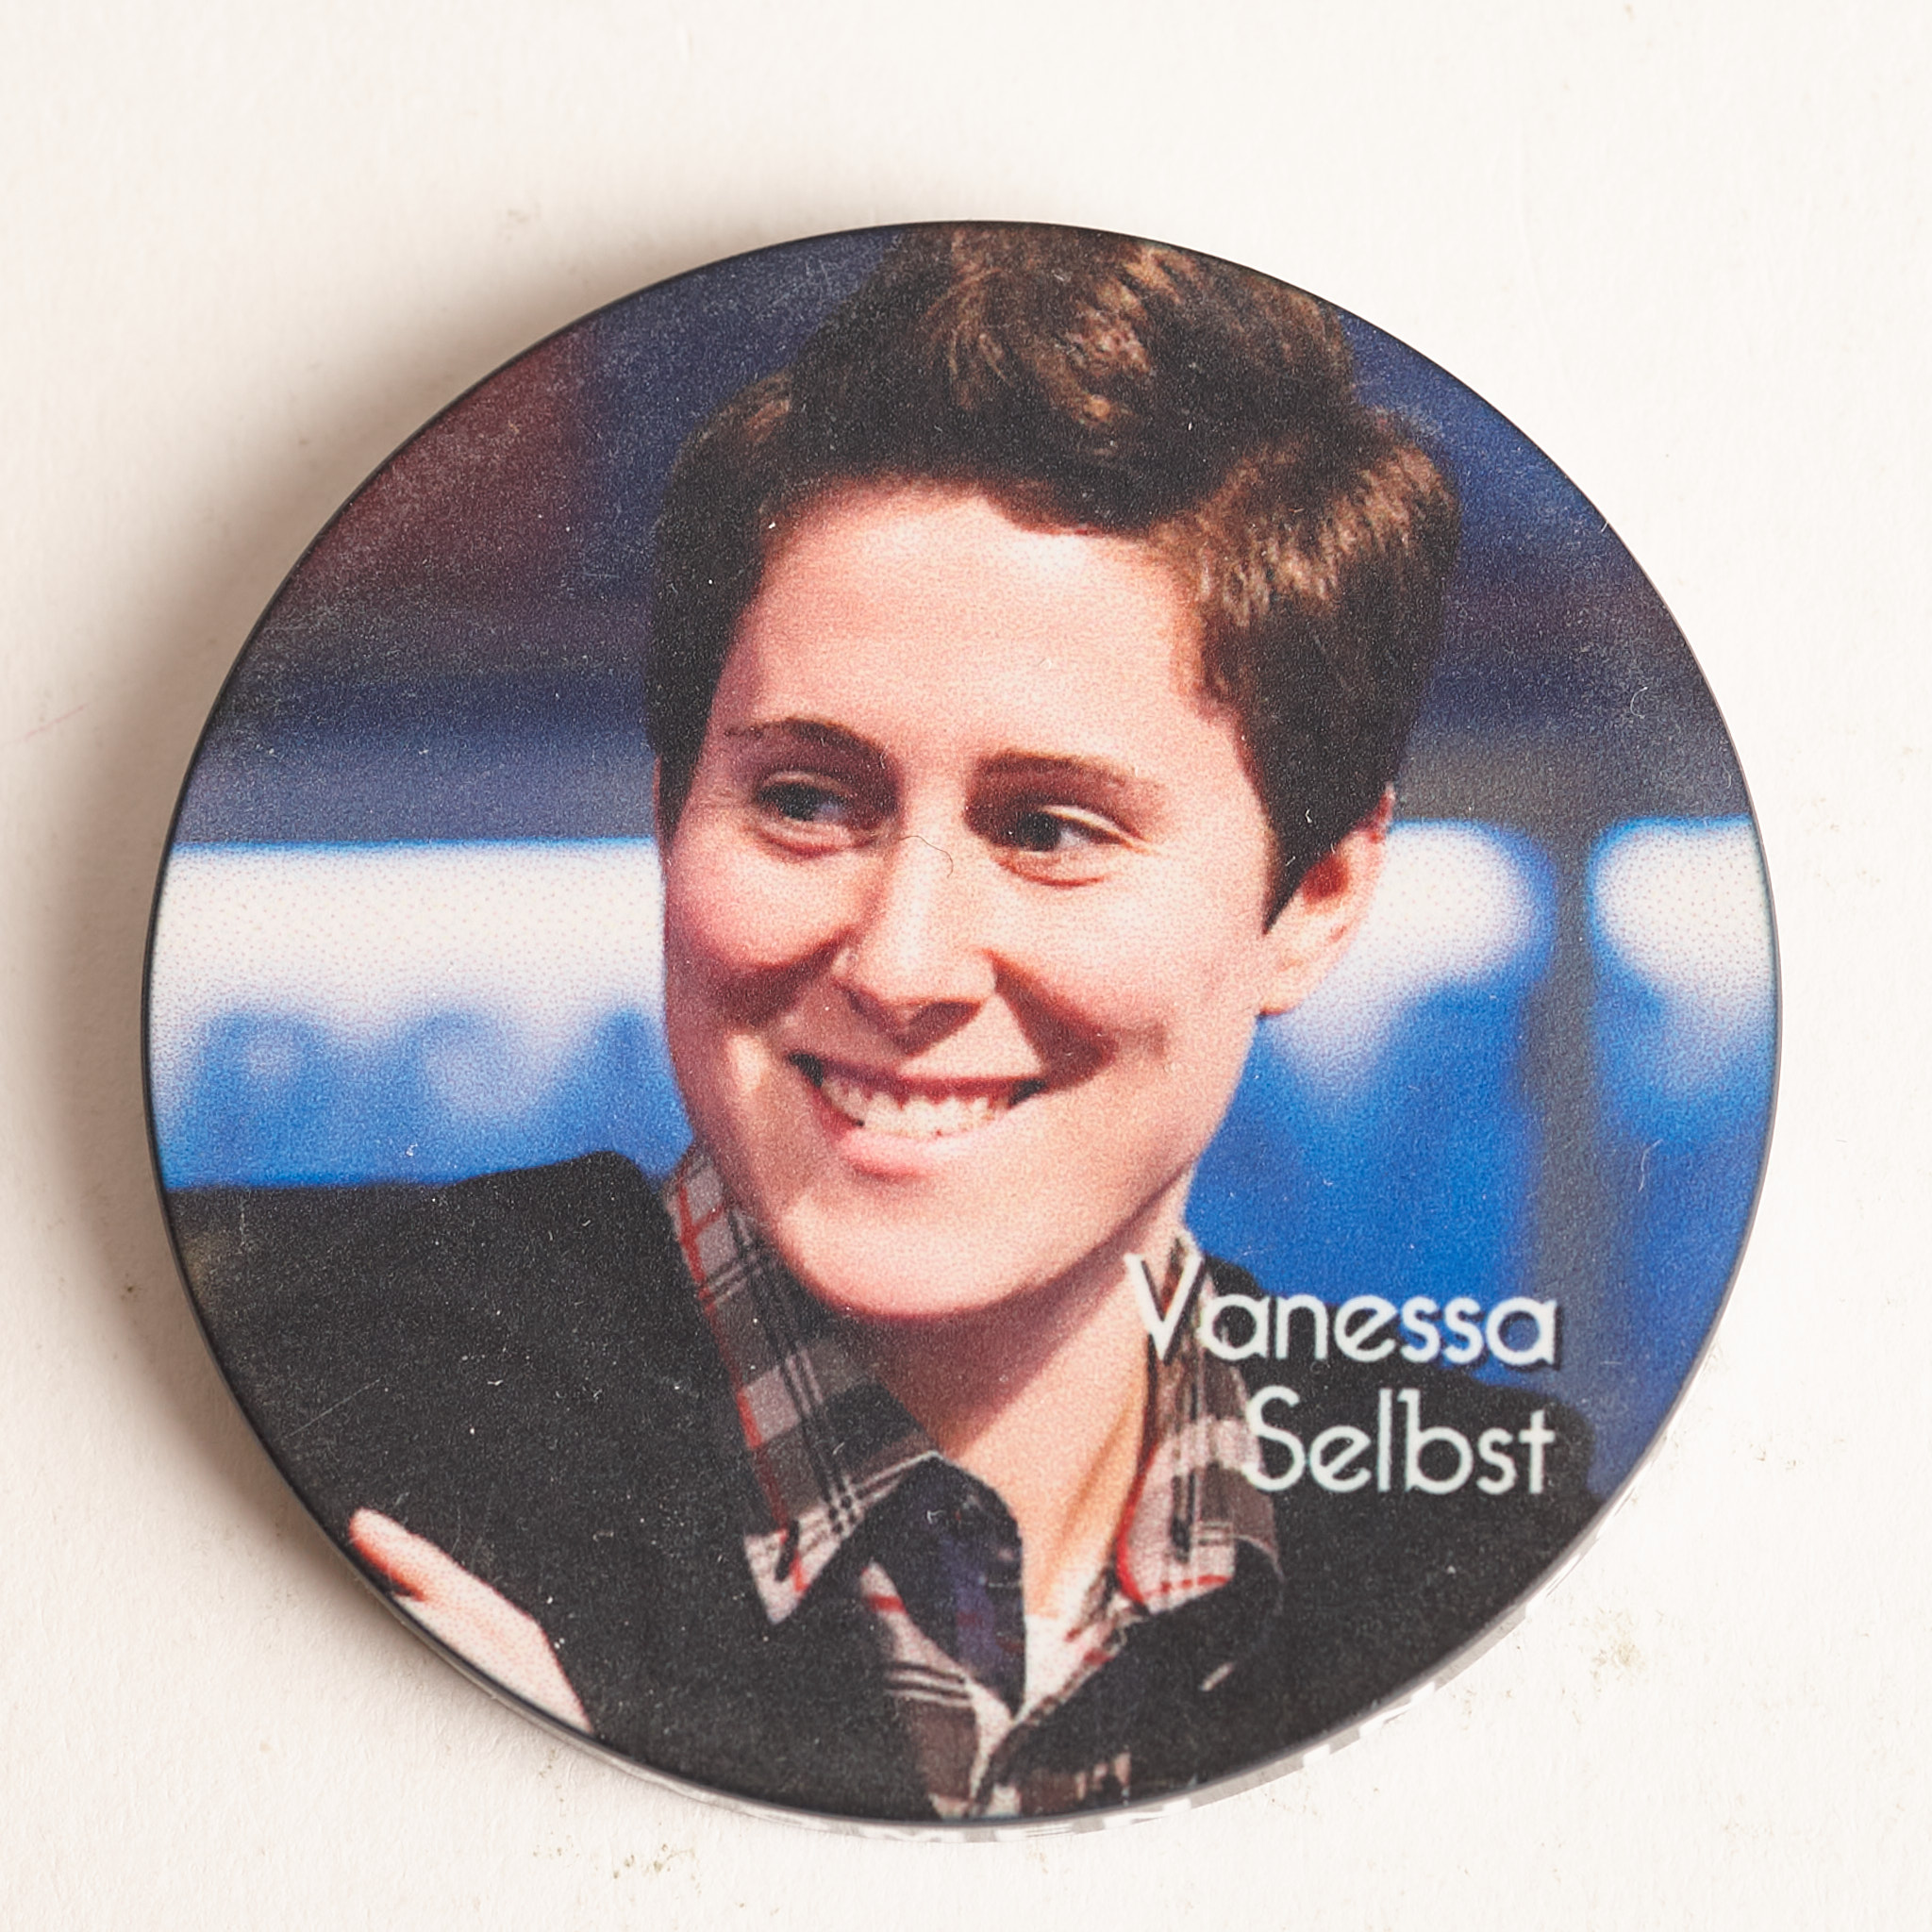 VANESSA SELBST, CLASS OF 22 WOMEN IN POKER HALL OF FAME, Poker Card Guard